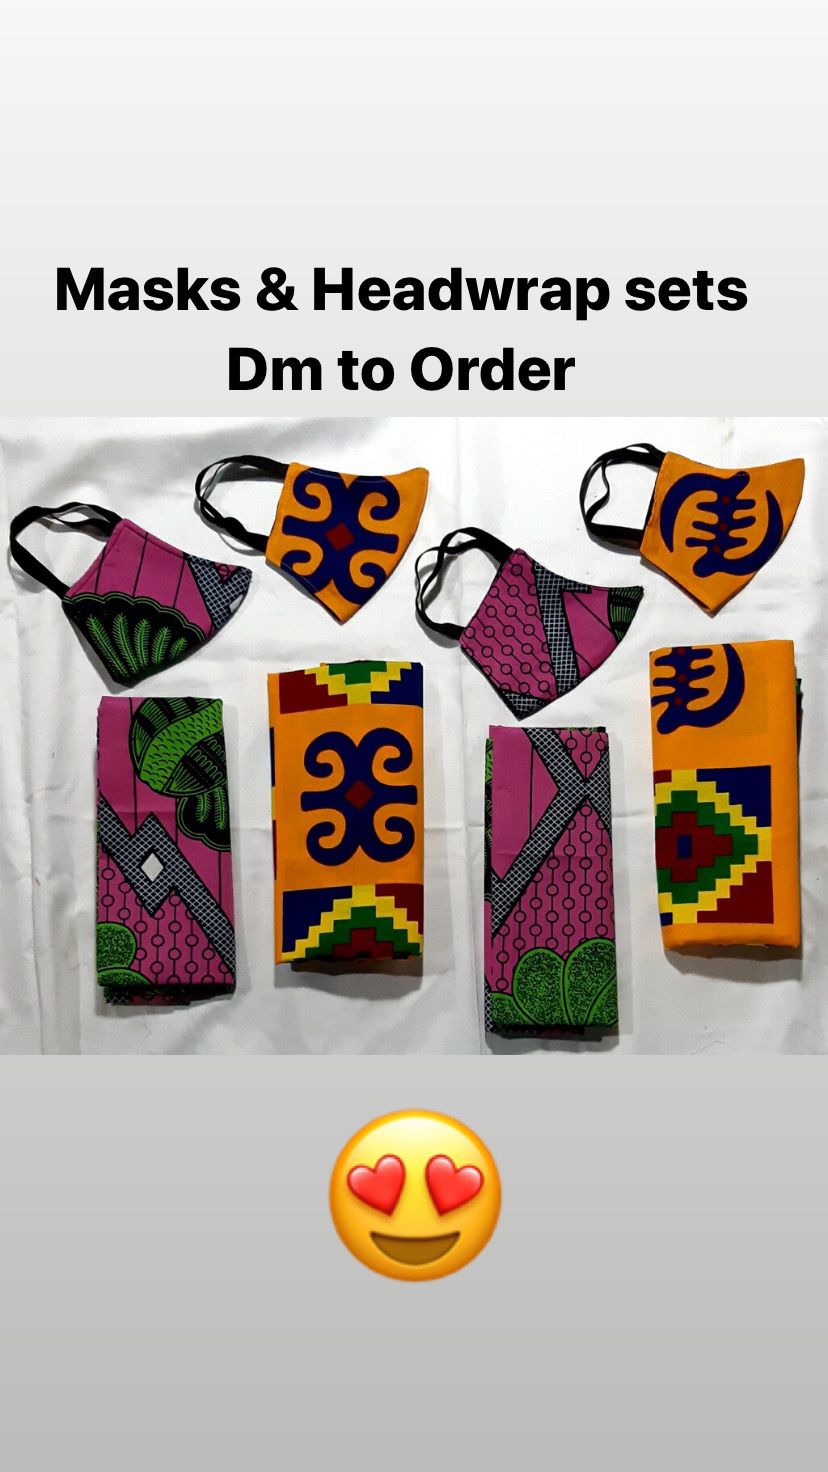 Masks and Headwrap Sets